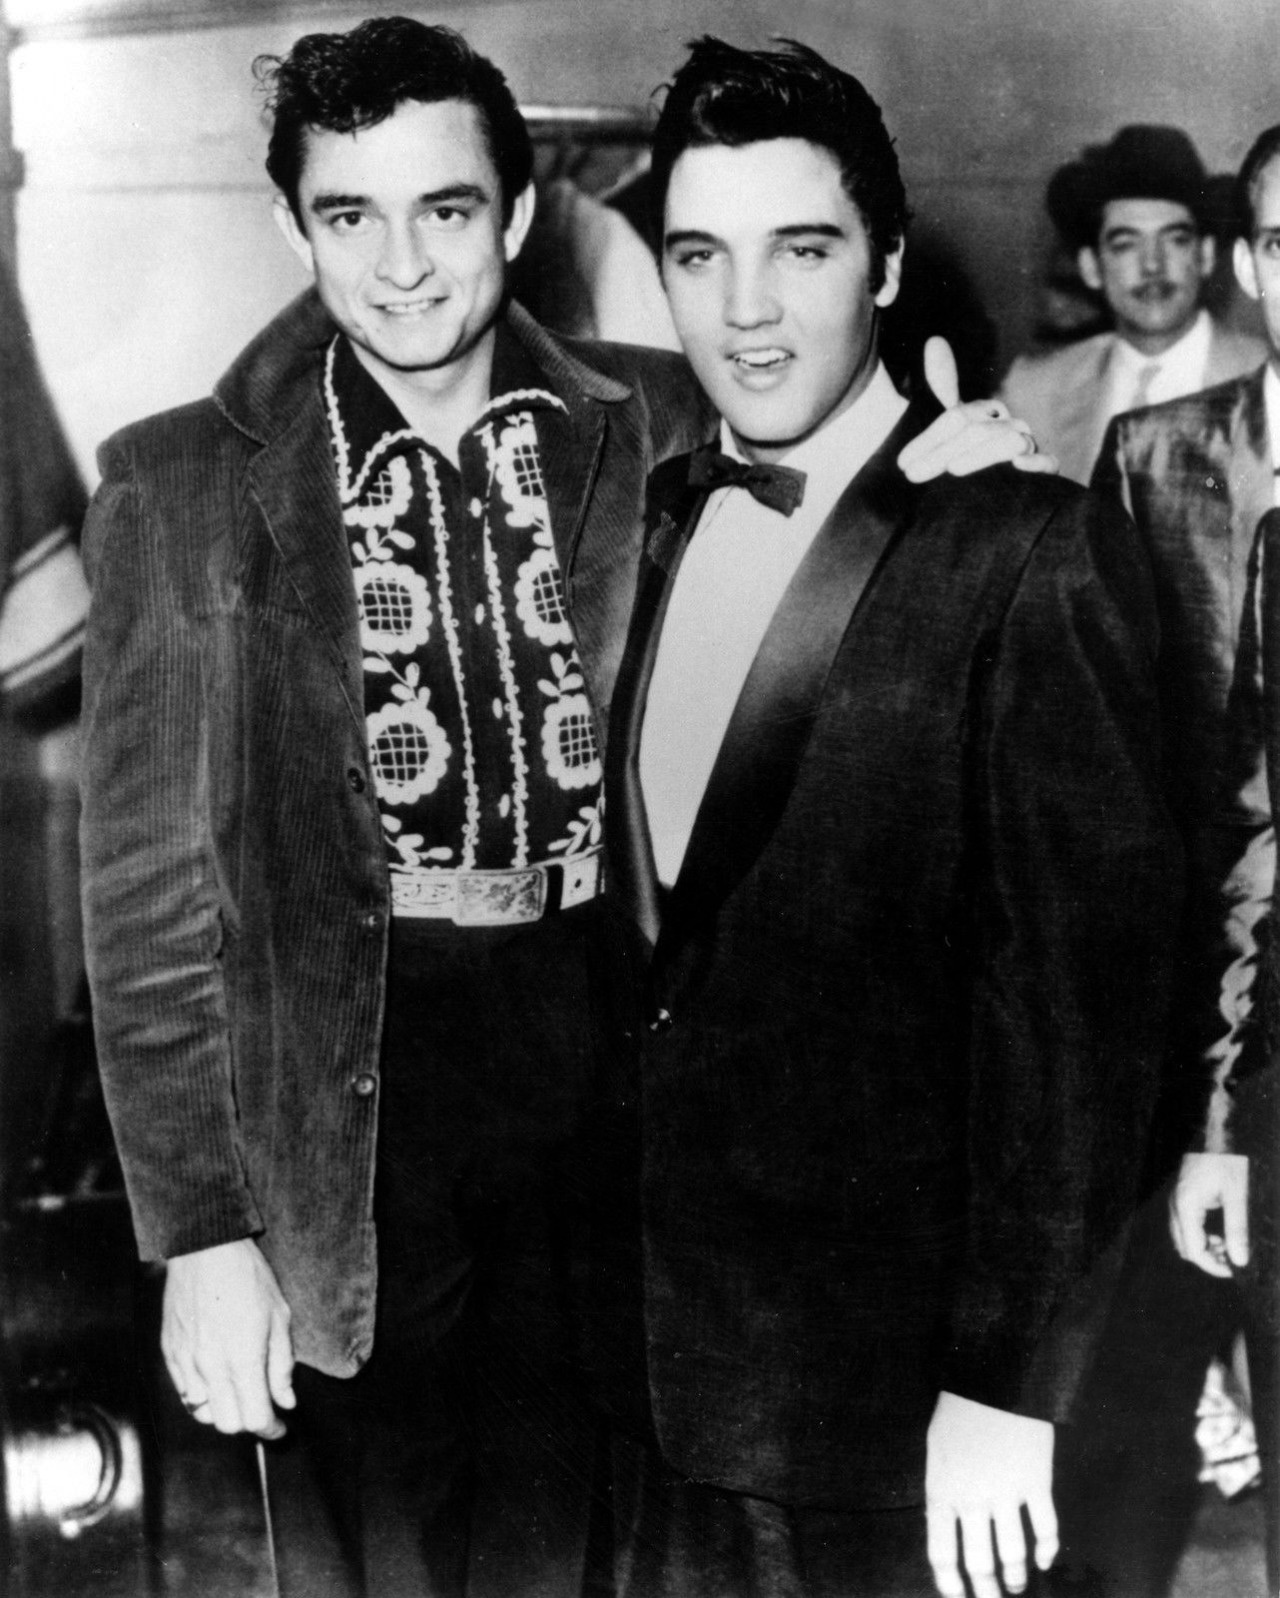 Elvis Presley and Johnny Cash pose in Memphis, Tennessee in 1957.